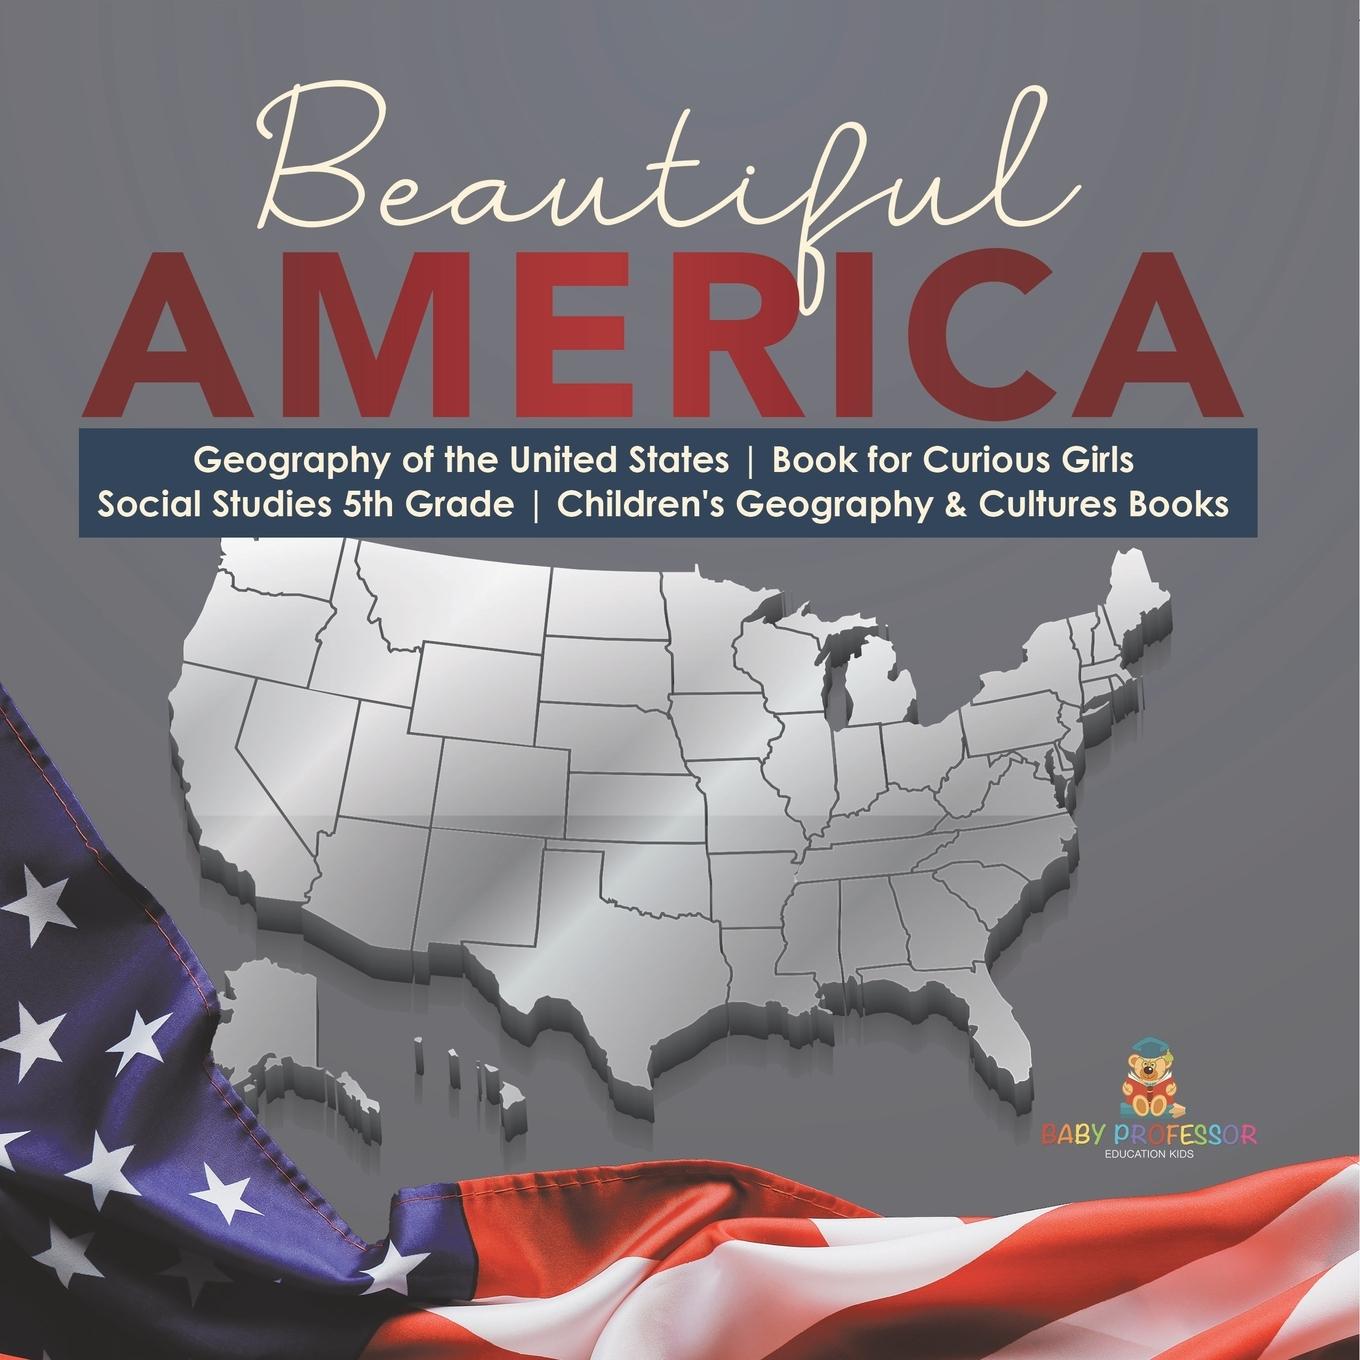 Book Beautiful America Geography of the United States Book for Curious Girls Social Studies 5th Grade Children's Geography & Cultures Books 